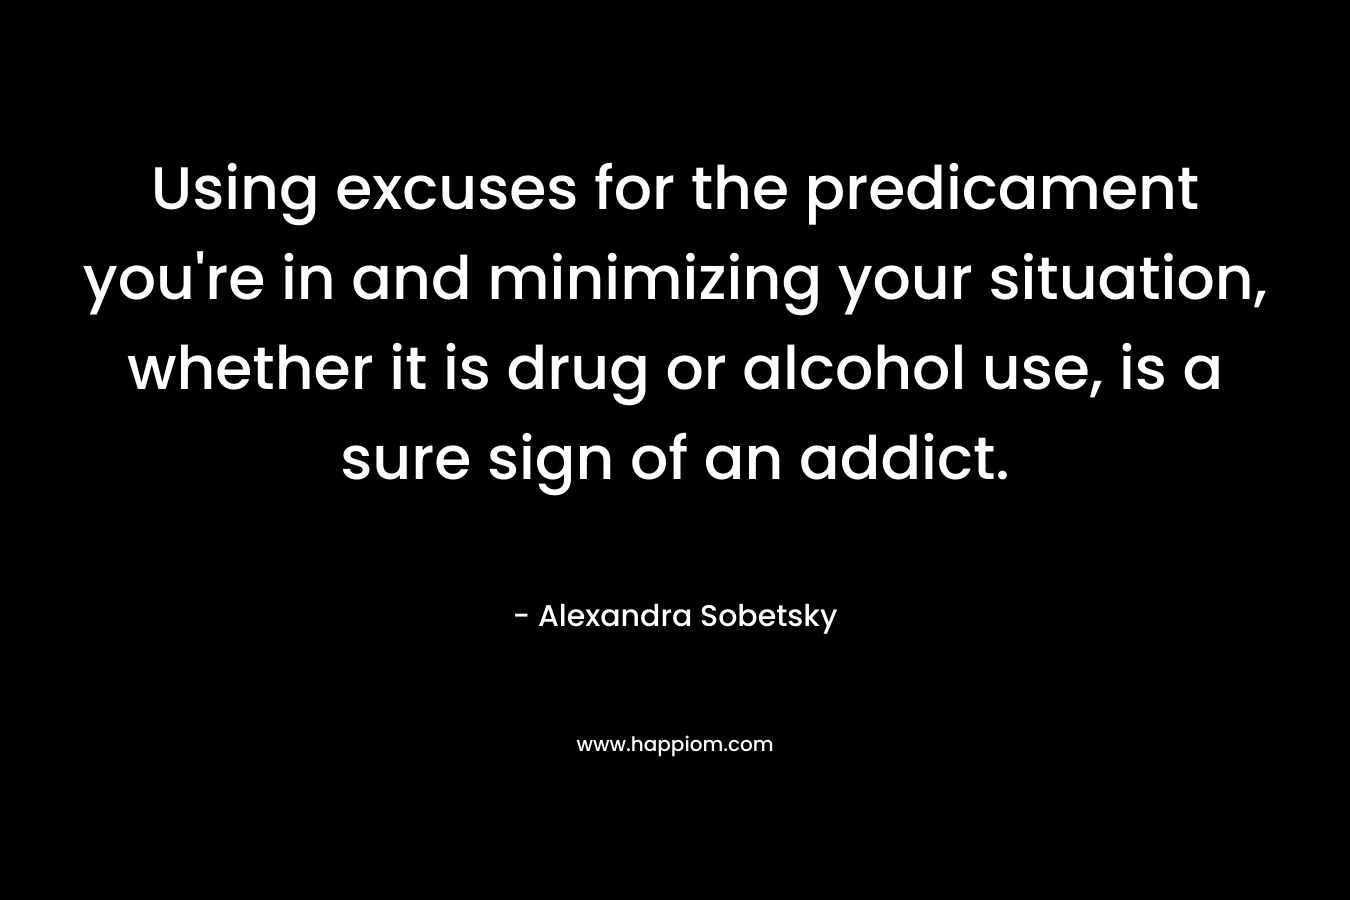 Using excuses for the predicament you’re in and minimizing your situation, whether it is drug or alcohol use, is a sure sign of an addict. – Alexandra Sobetsky